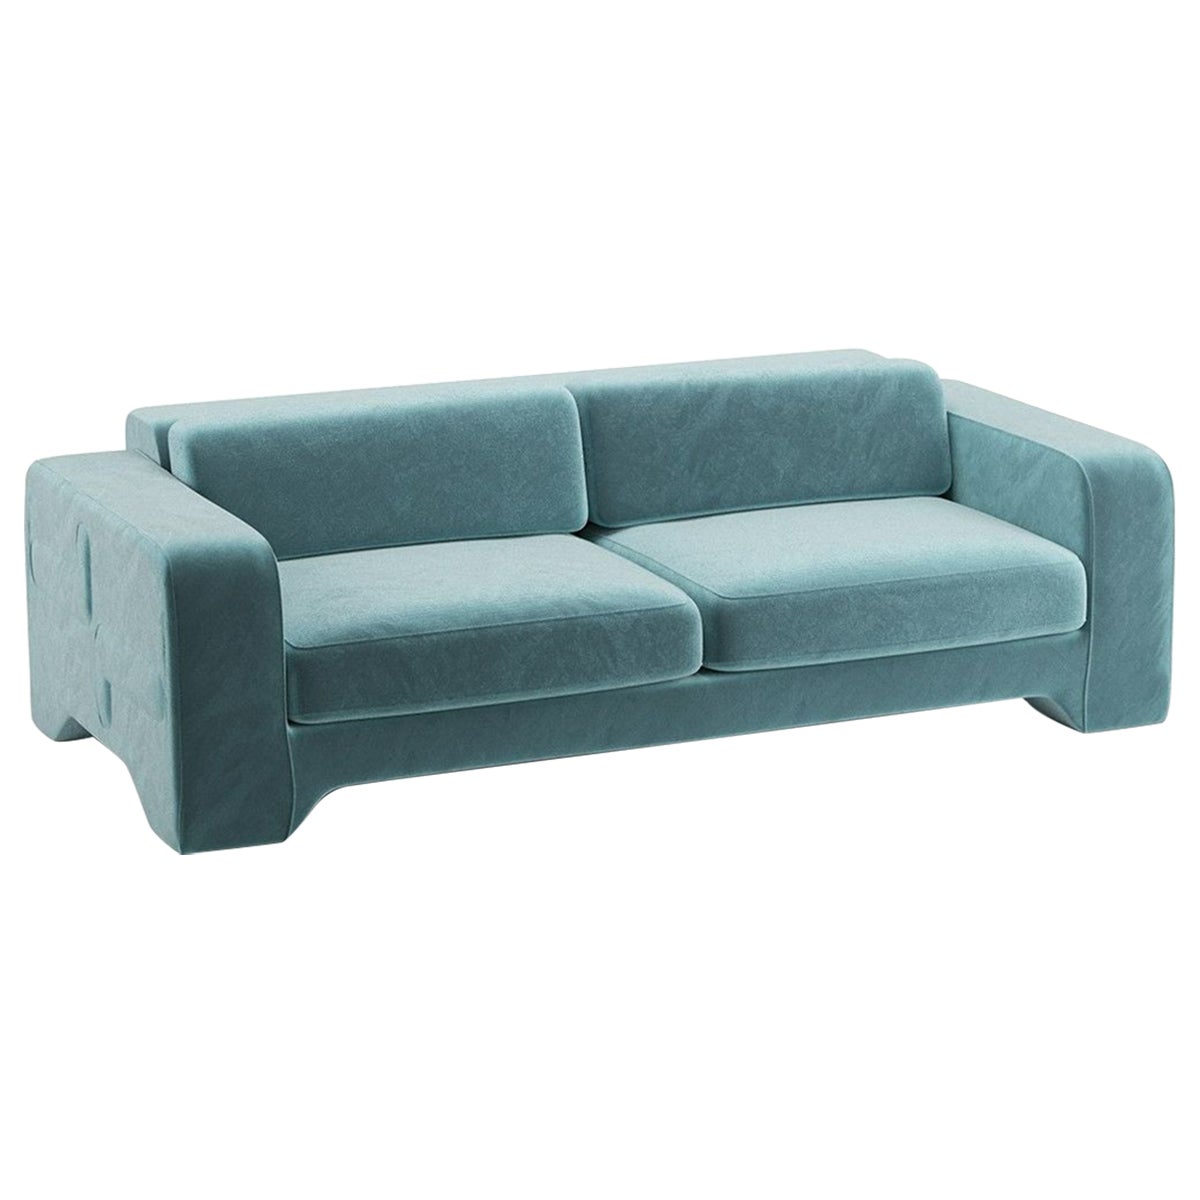 Popus Editions Giovanna 3 Seater Sofa in Blue Verone Velvet Upholstery For Sale